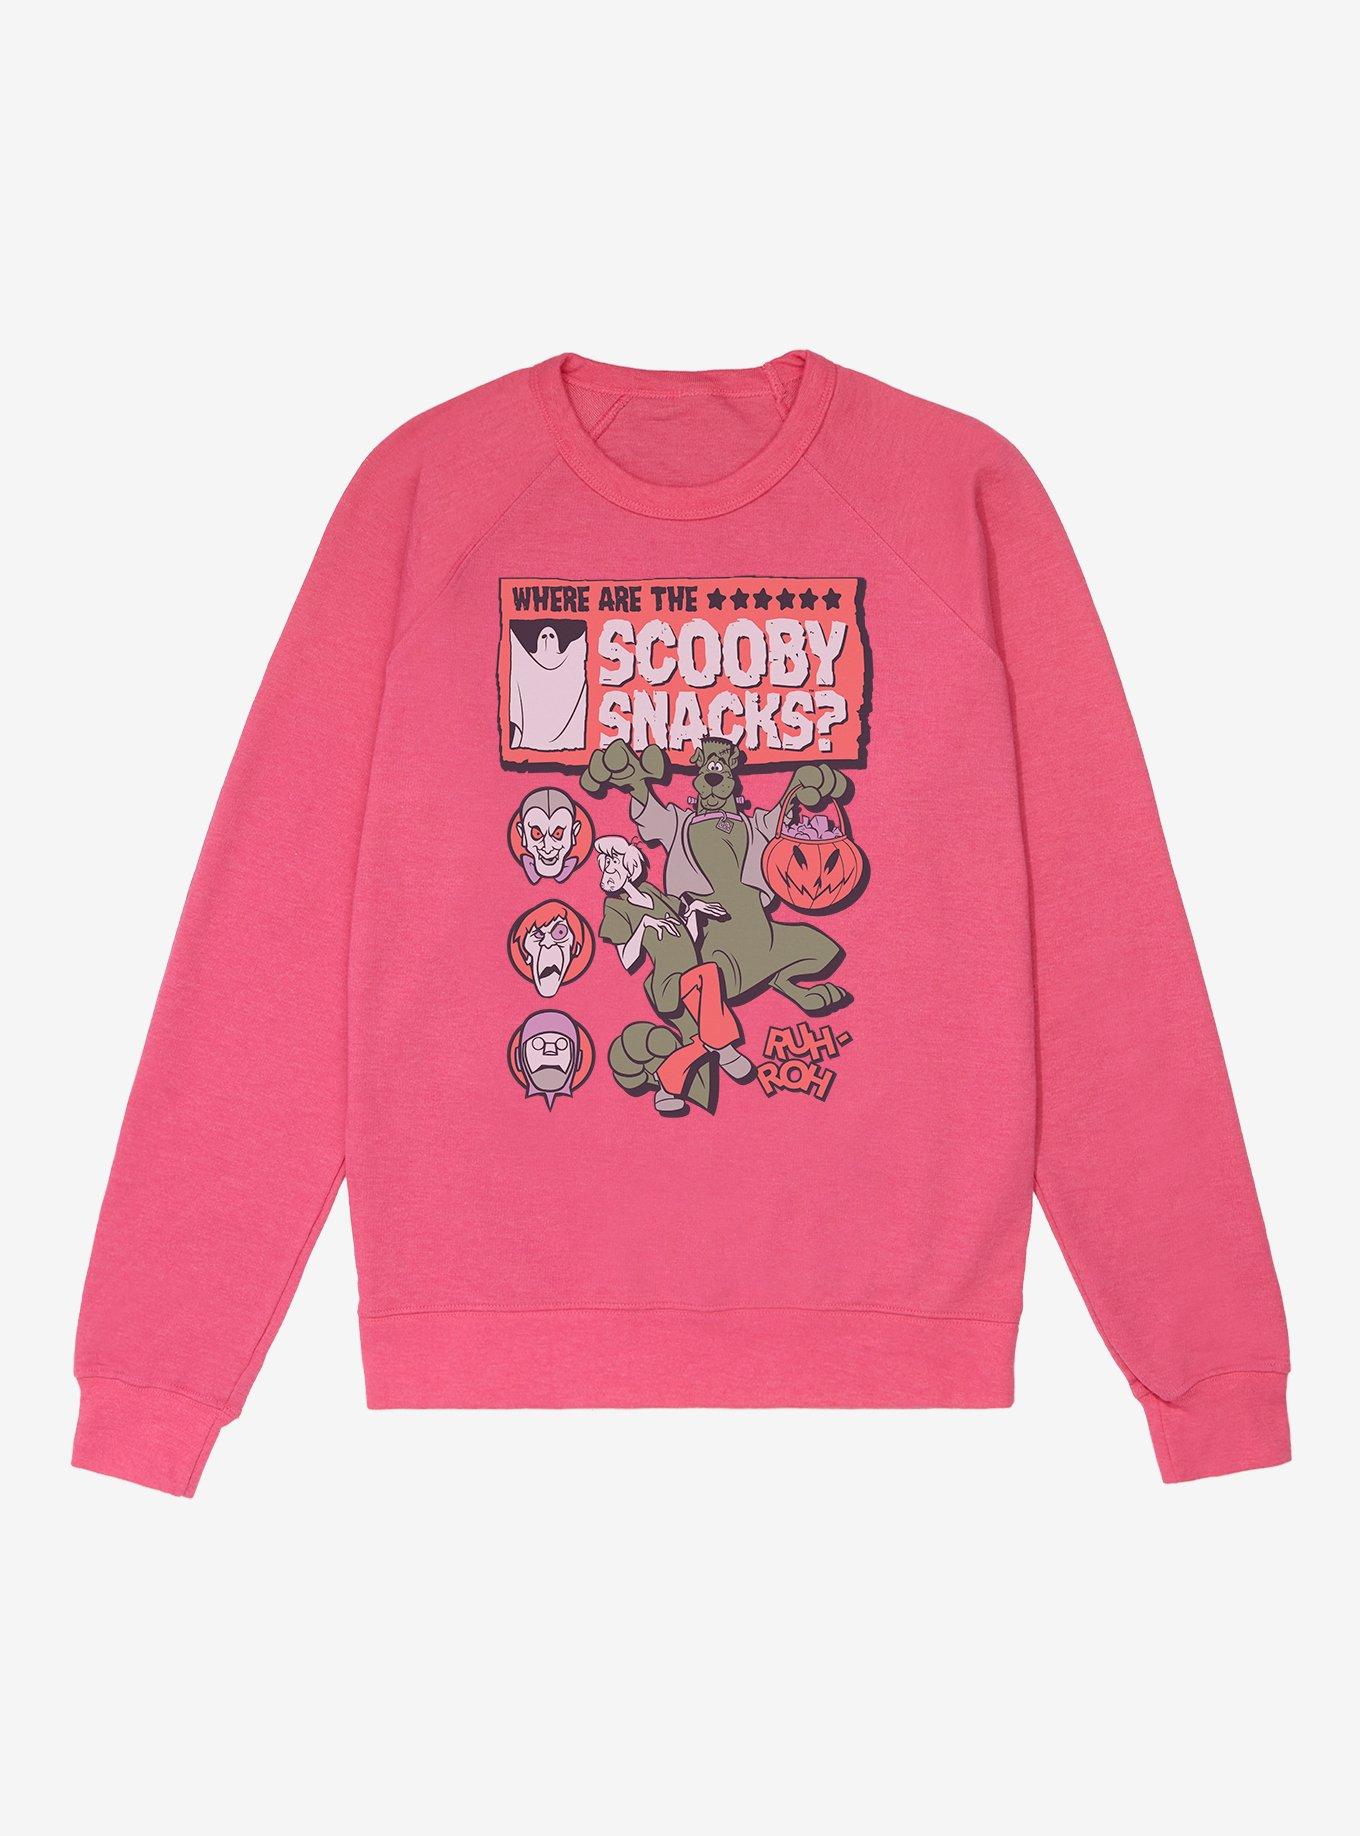 Scooby-Doo Where Are The Scooby Snacks French Terry Sweatshirt - PINK ...